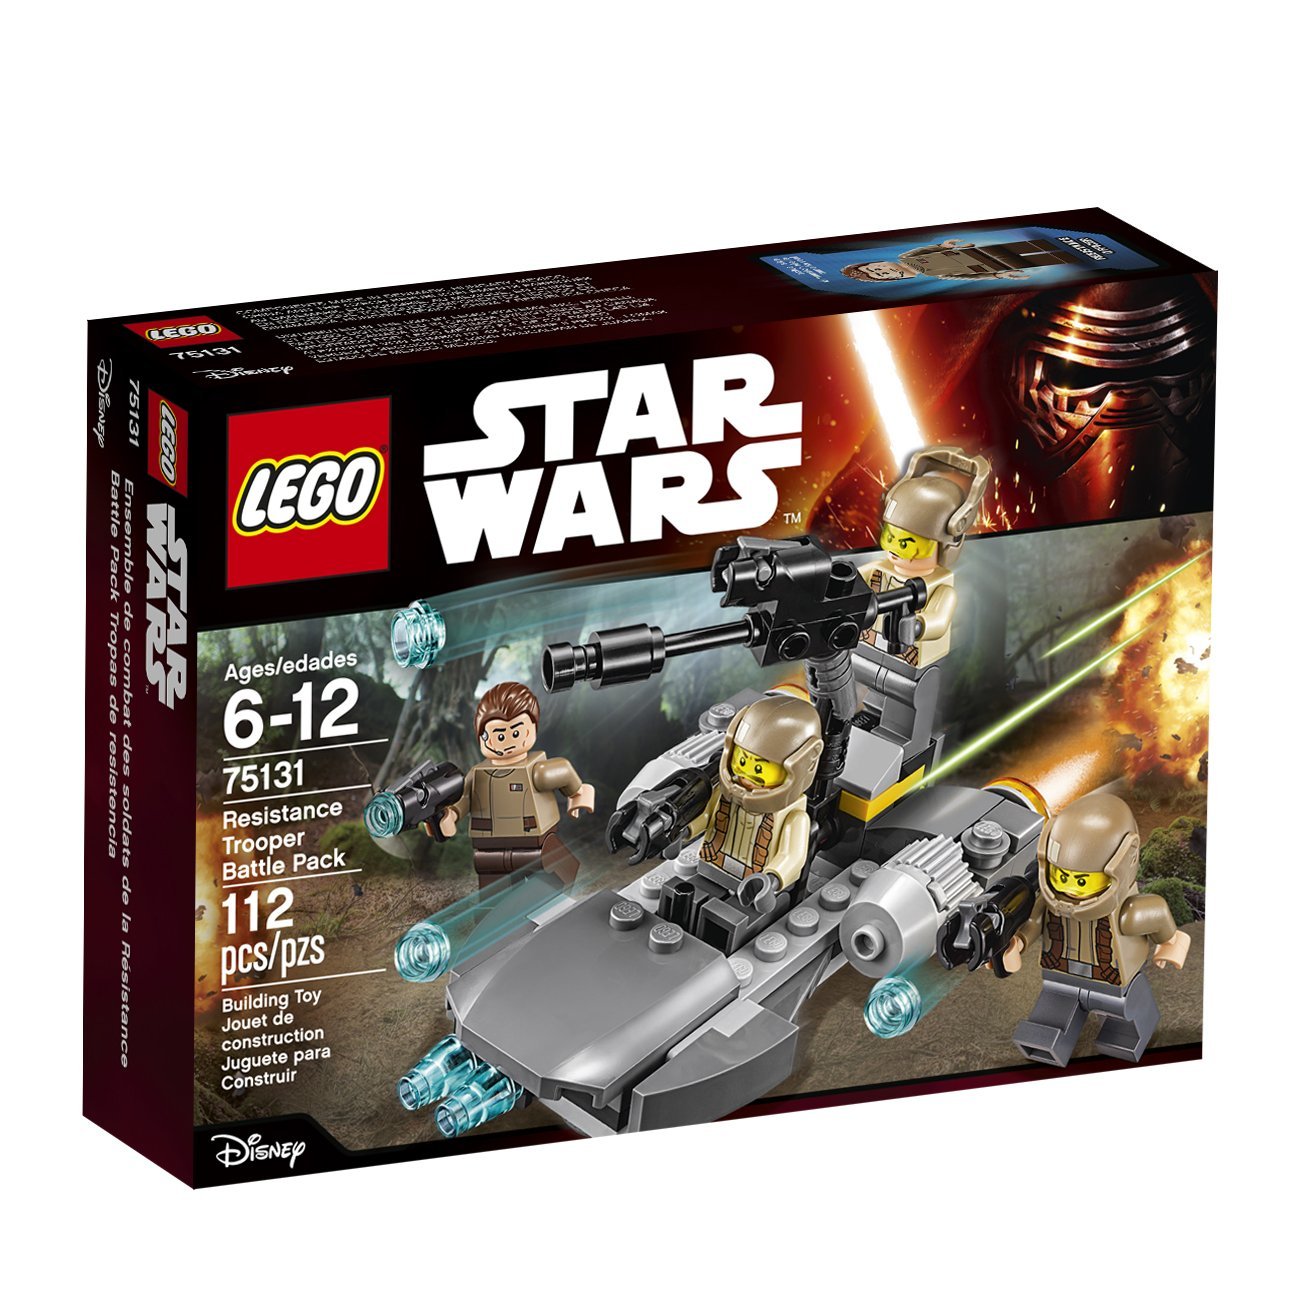 New LEGO Star Wars Sets - The Force Awakens